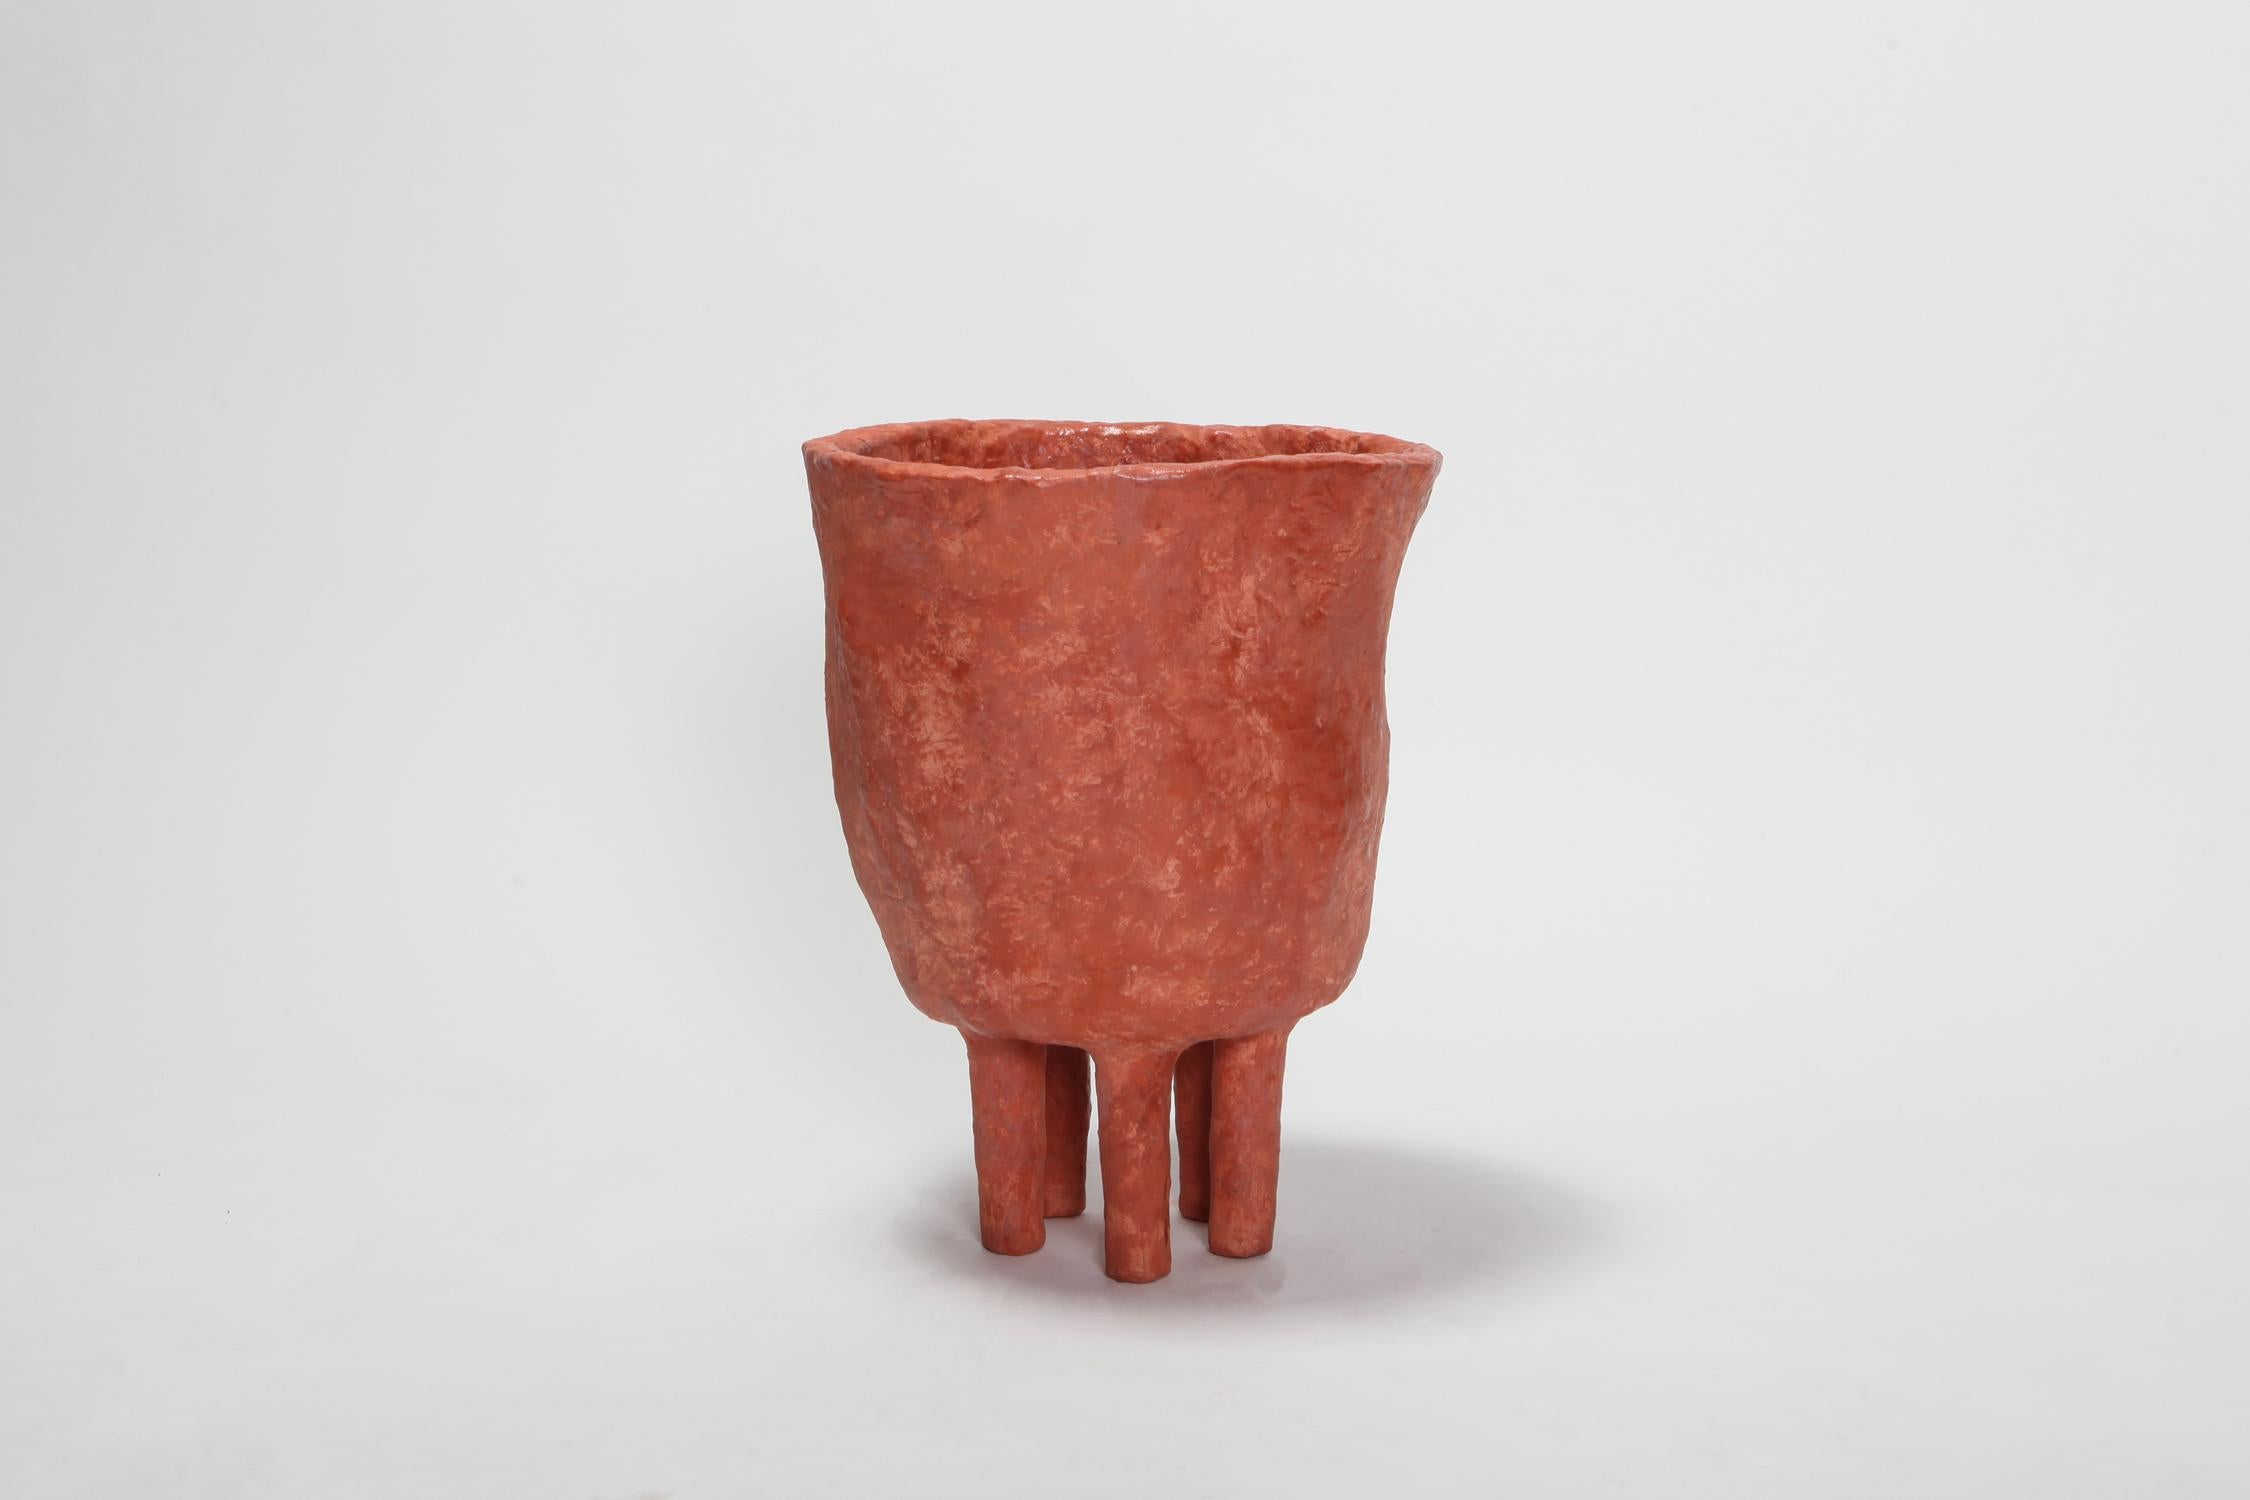 Cotta vessel by Decio Studio made at alfa.brussels for Everyday Gallery, unique piece, 2019??. The piece belongs to categories: collectible design, functional art & art furniture.

Decio (IT) shows ‘Cotta’, his unseen and undiscovered body of